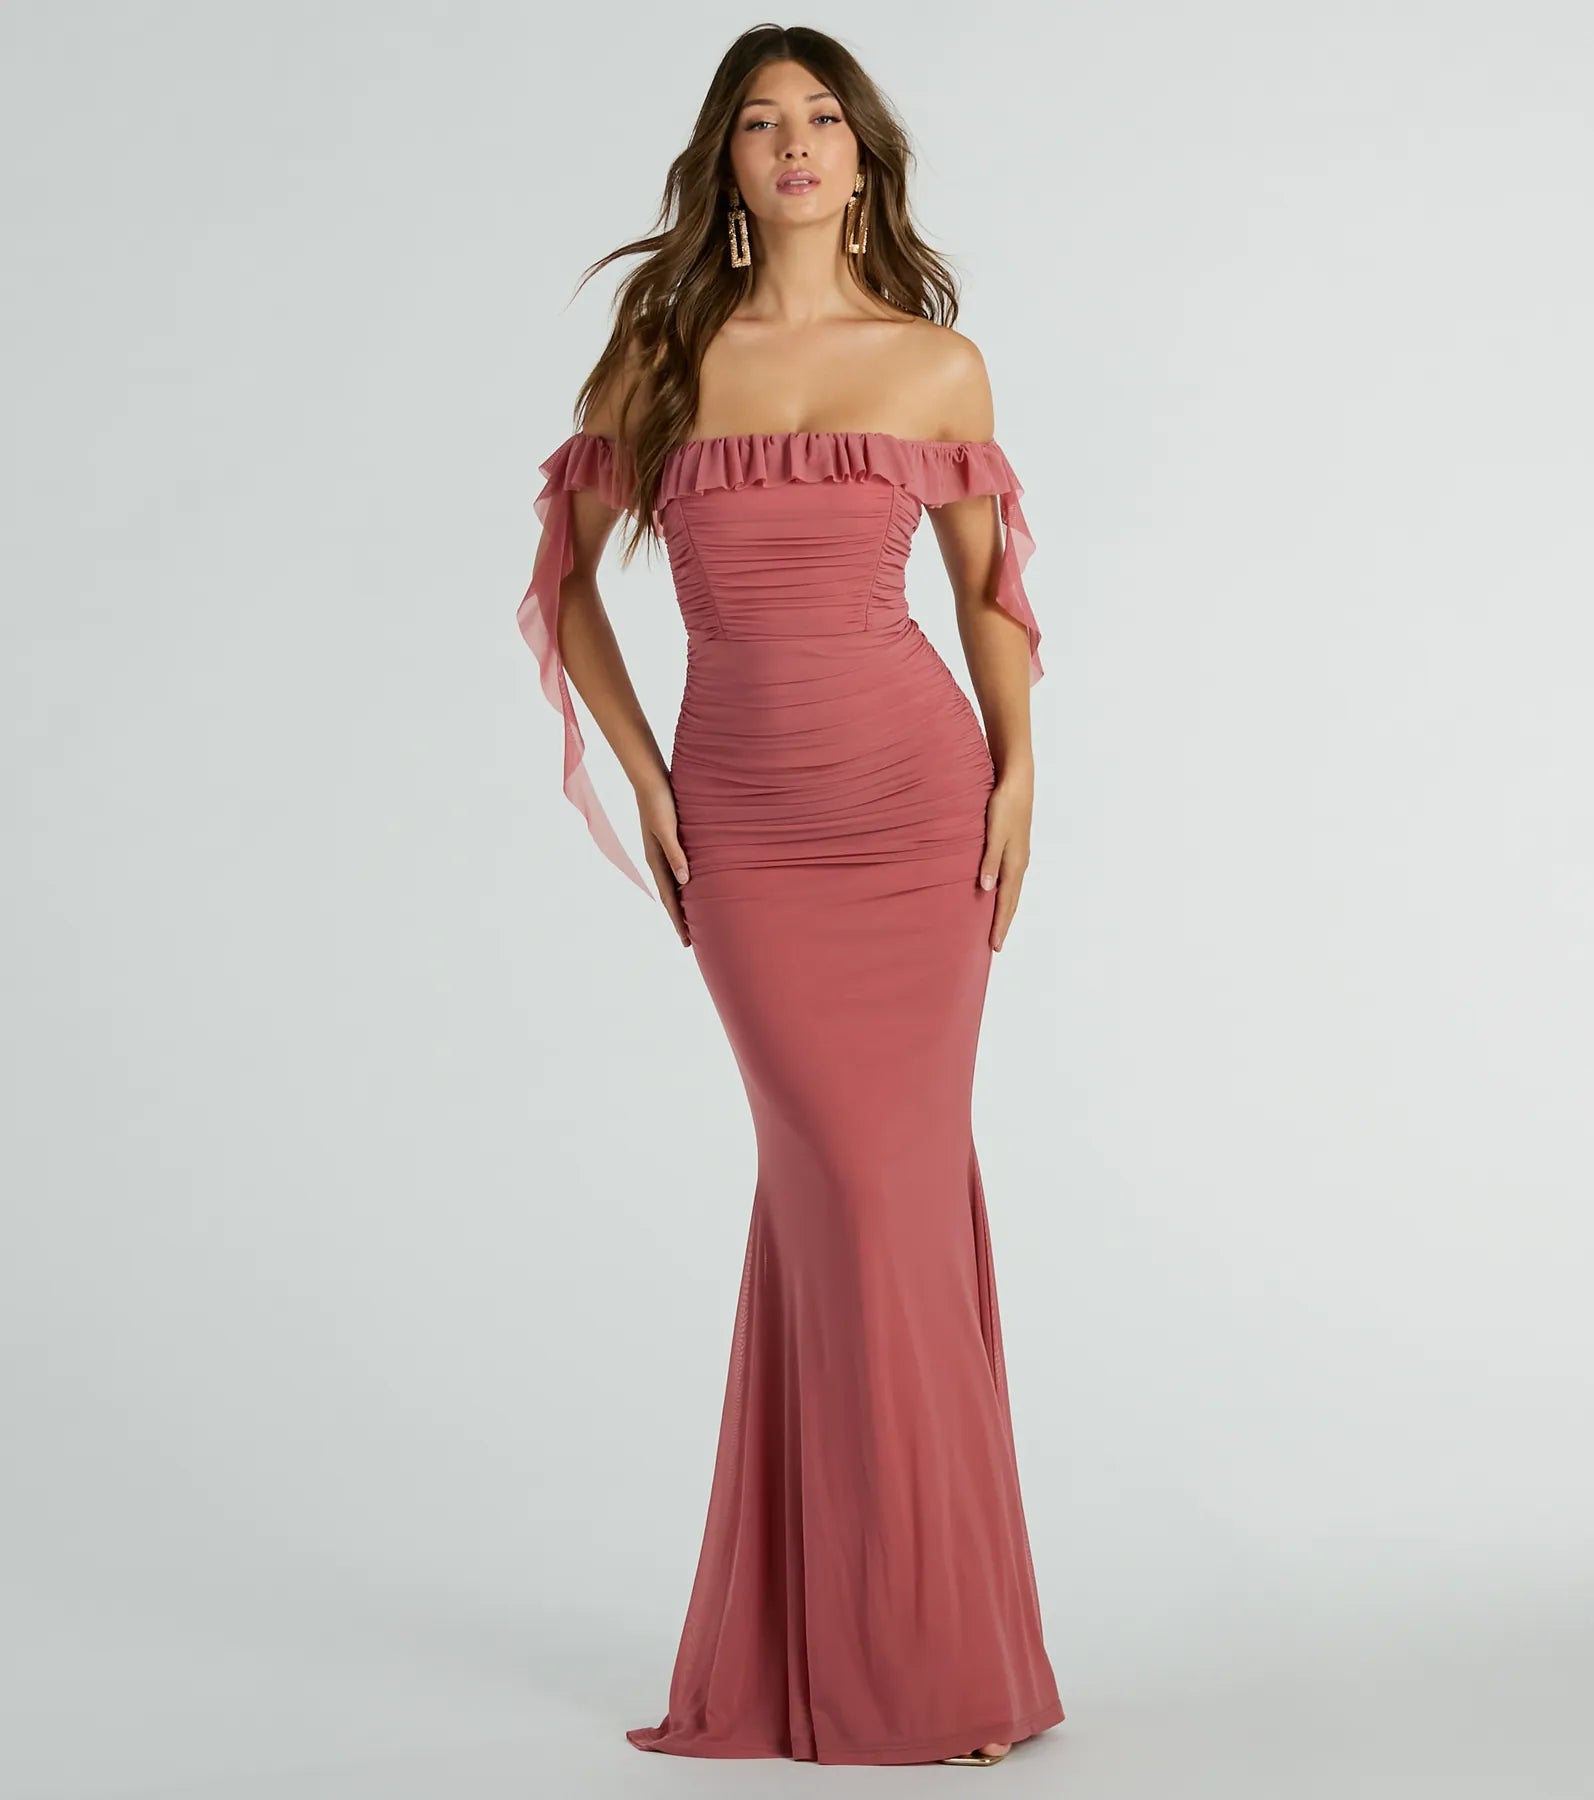 Sexy Sophisticated Knit Mermaid Off the Shoulder Ruched Mesh Stretchy Maxi Dress With Ruffles